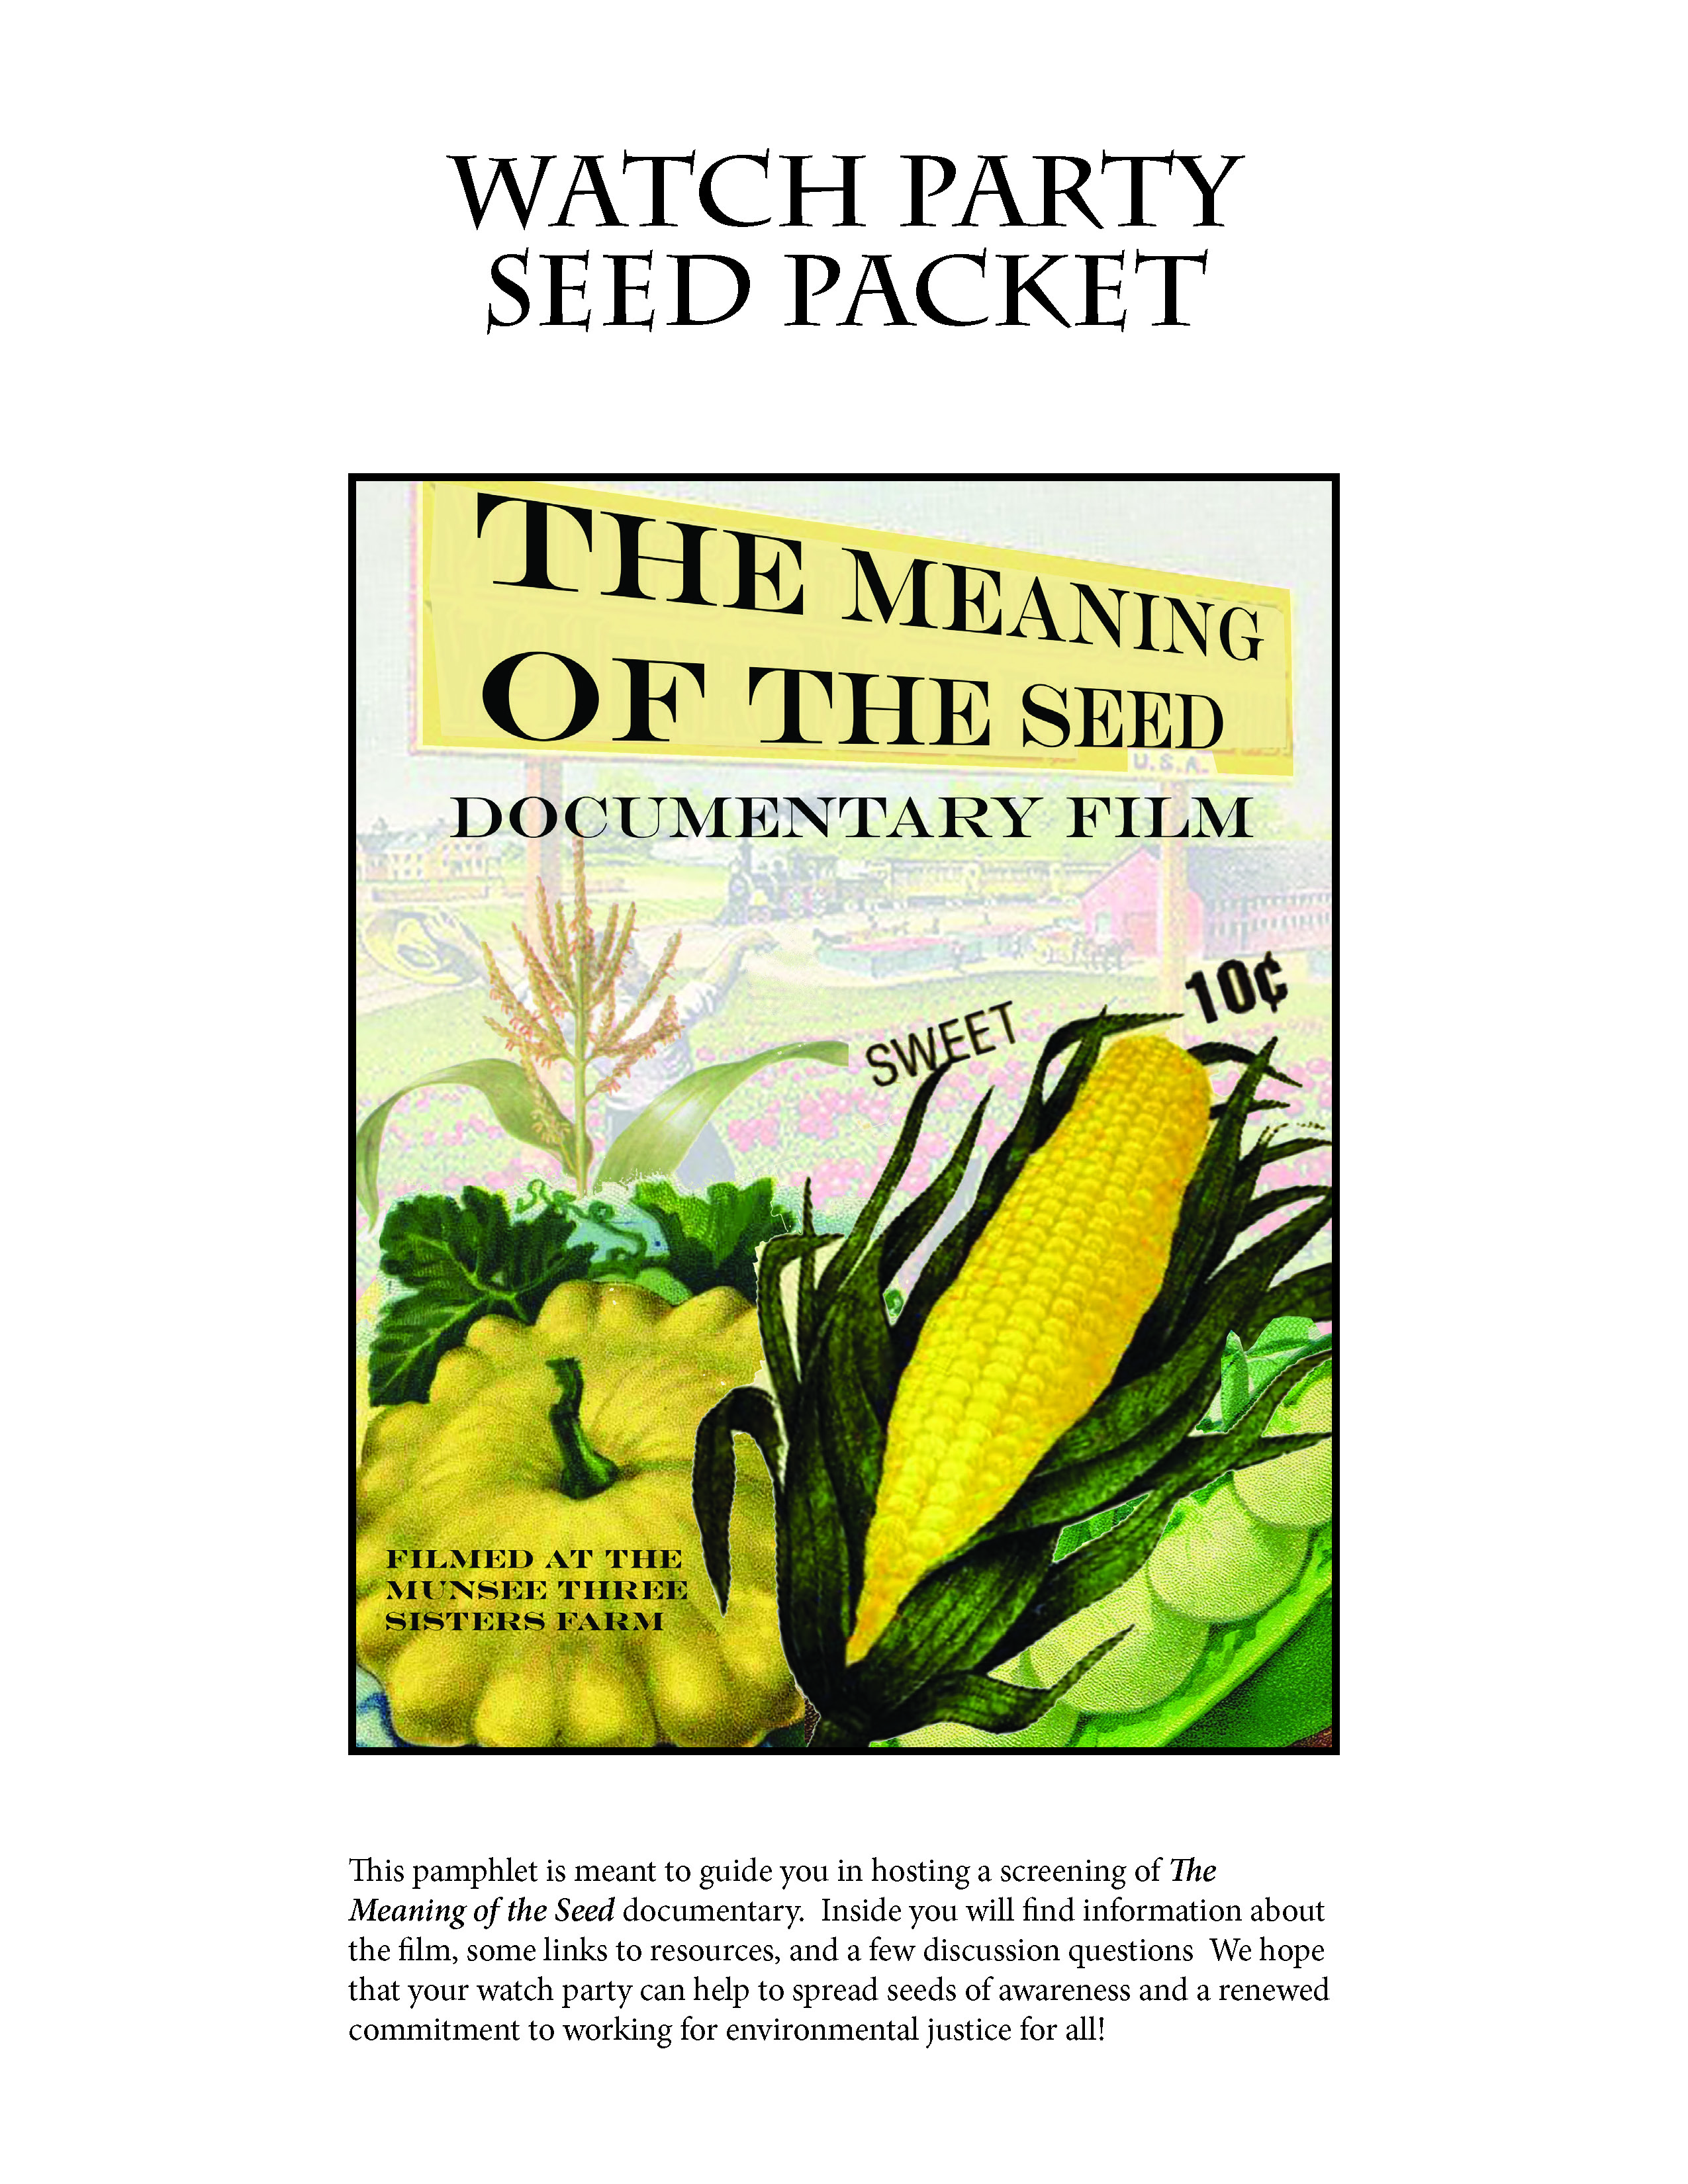 Meaning of the Seed Watch Party Packet